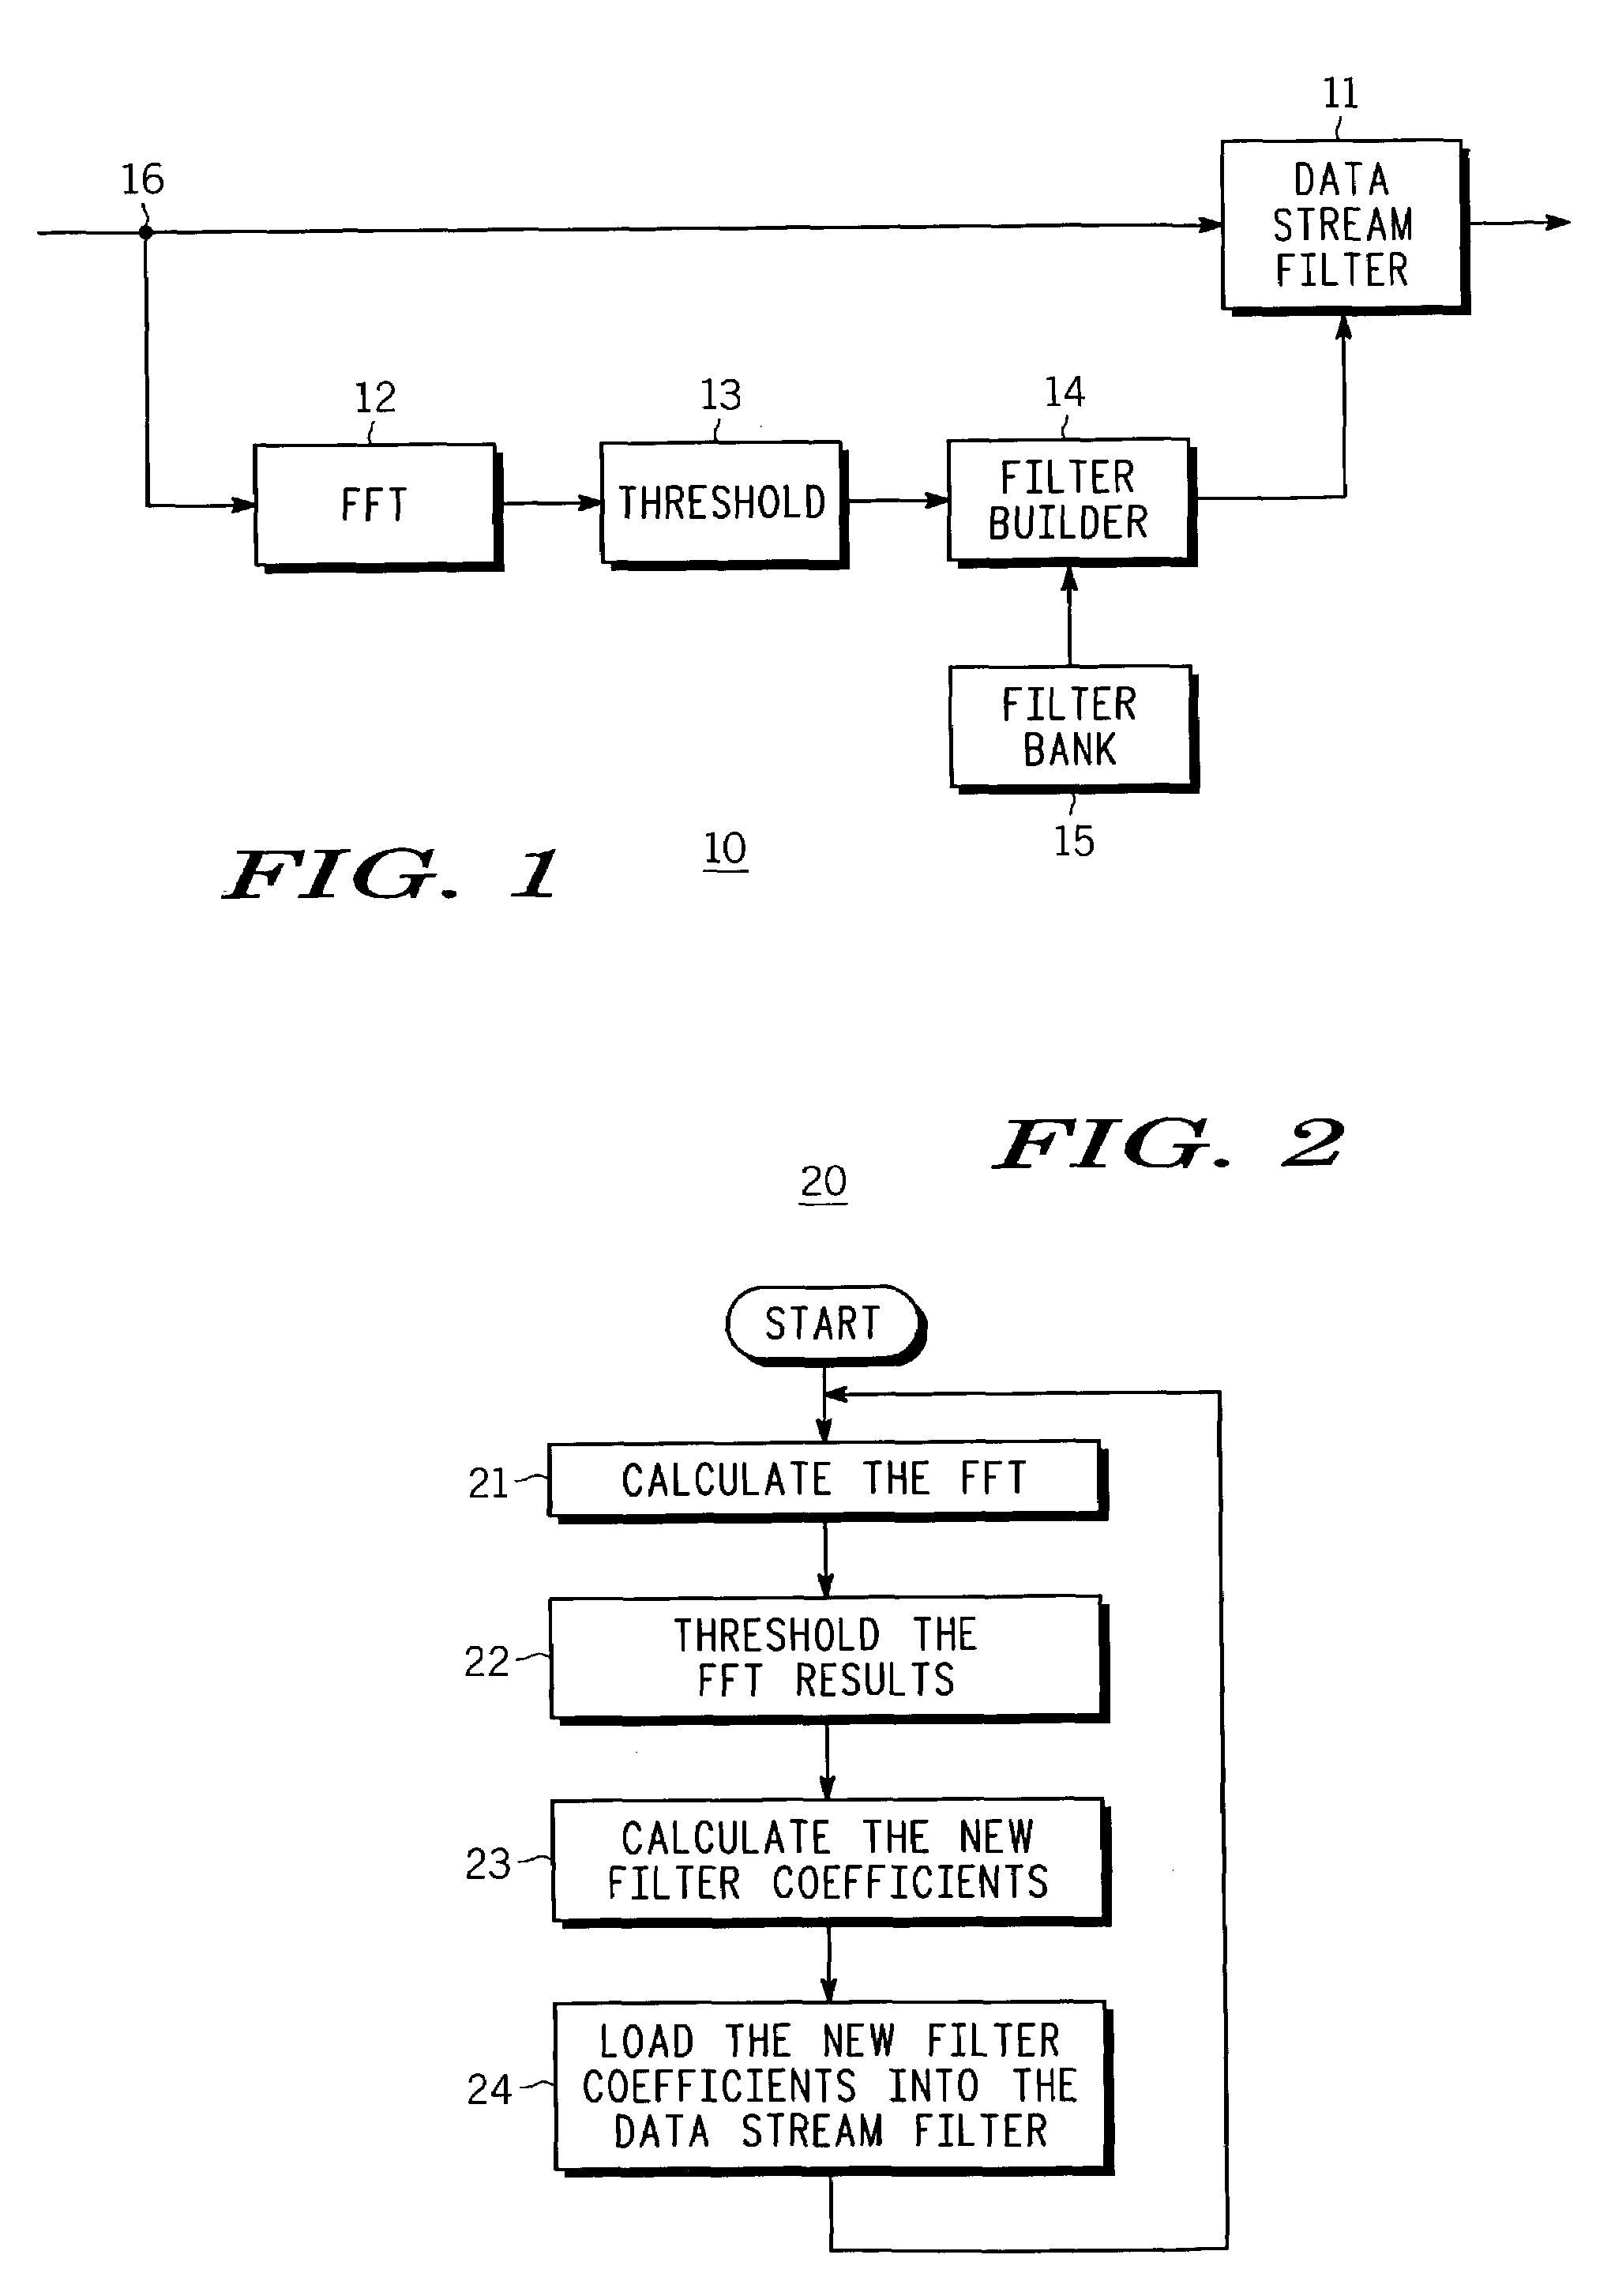 Narrowband interference and identification and digital processing for cable television return path performance enhancement